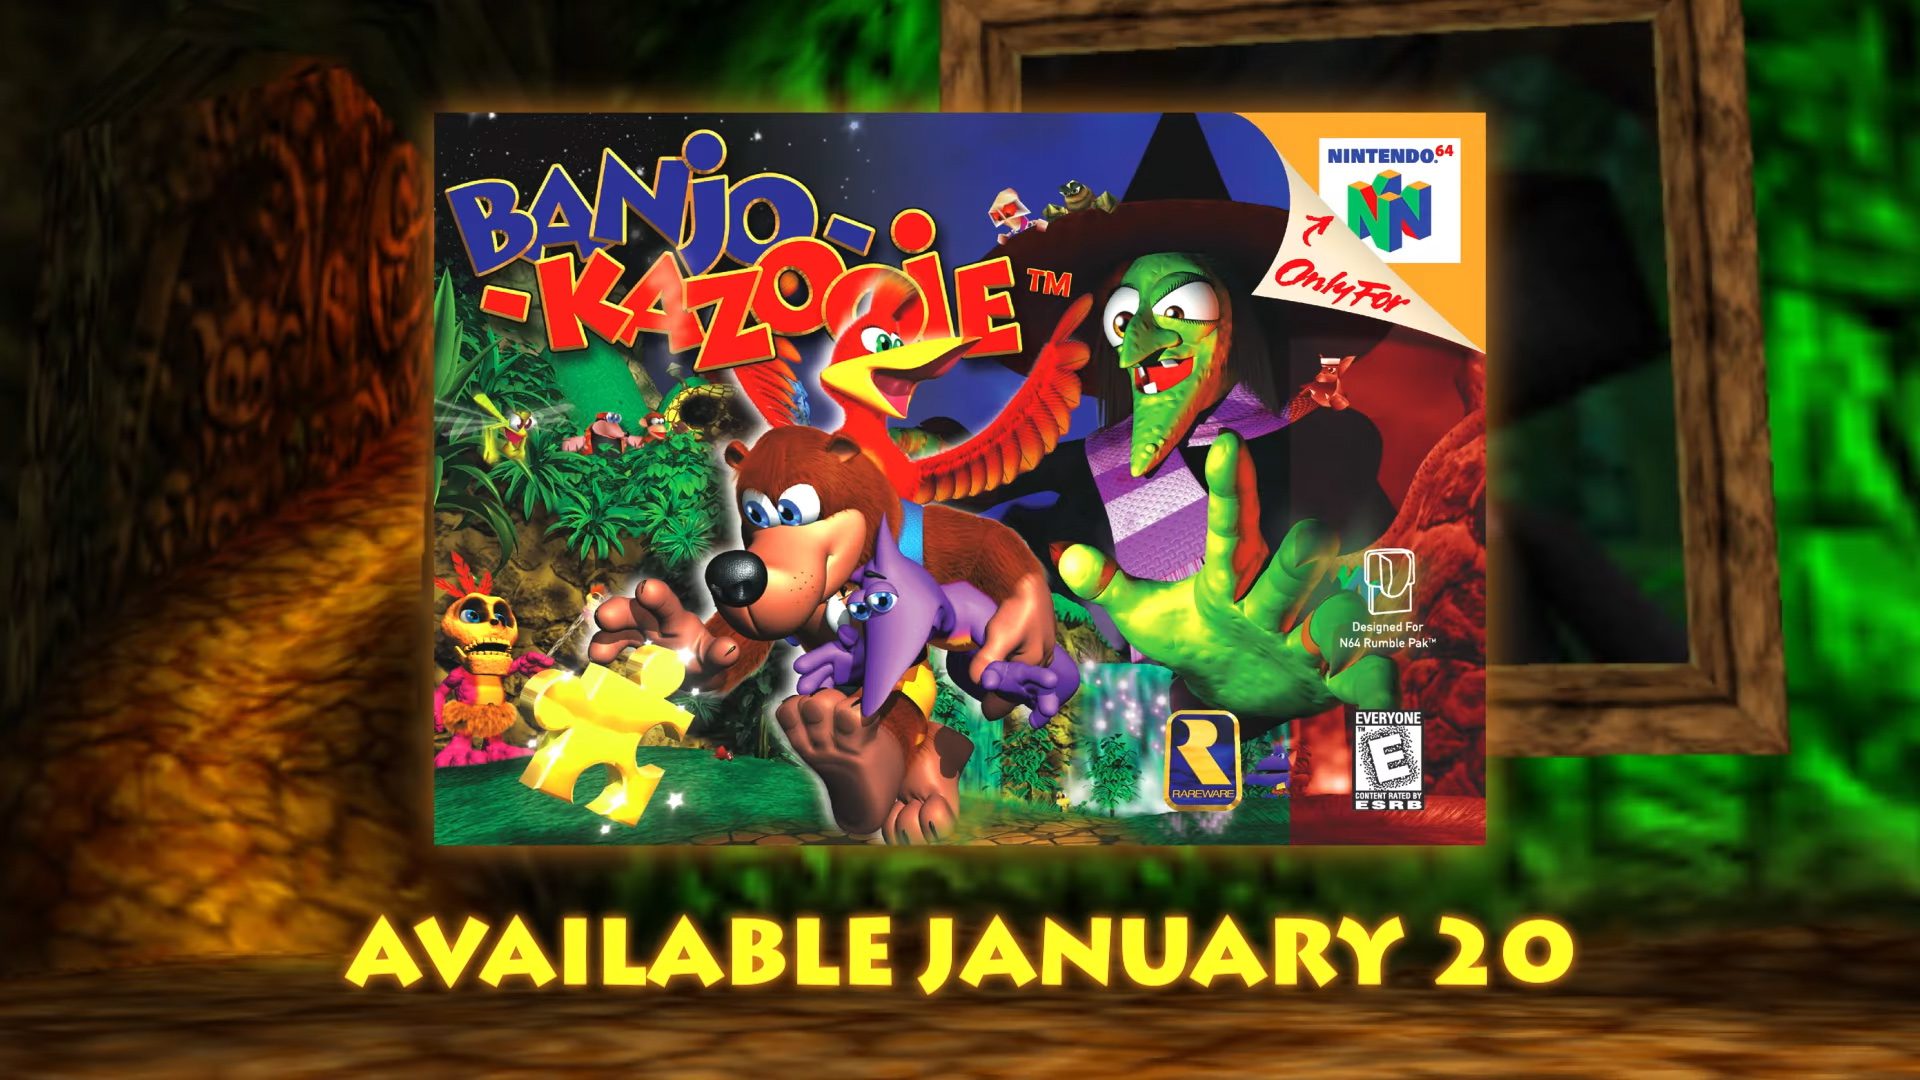 Banjo-Kazooie Spanish ROM patch now available - N64 Squid